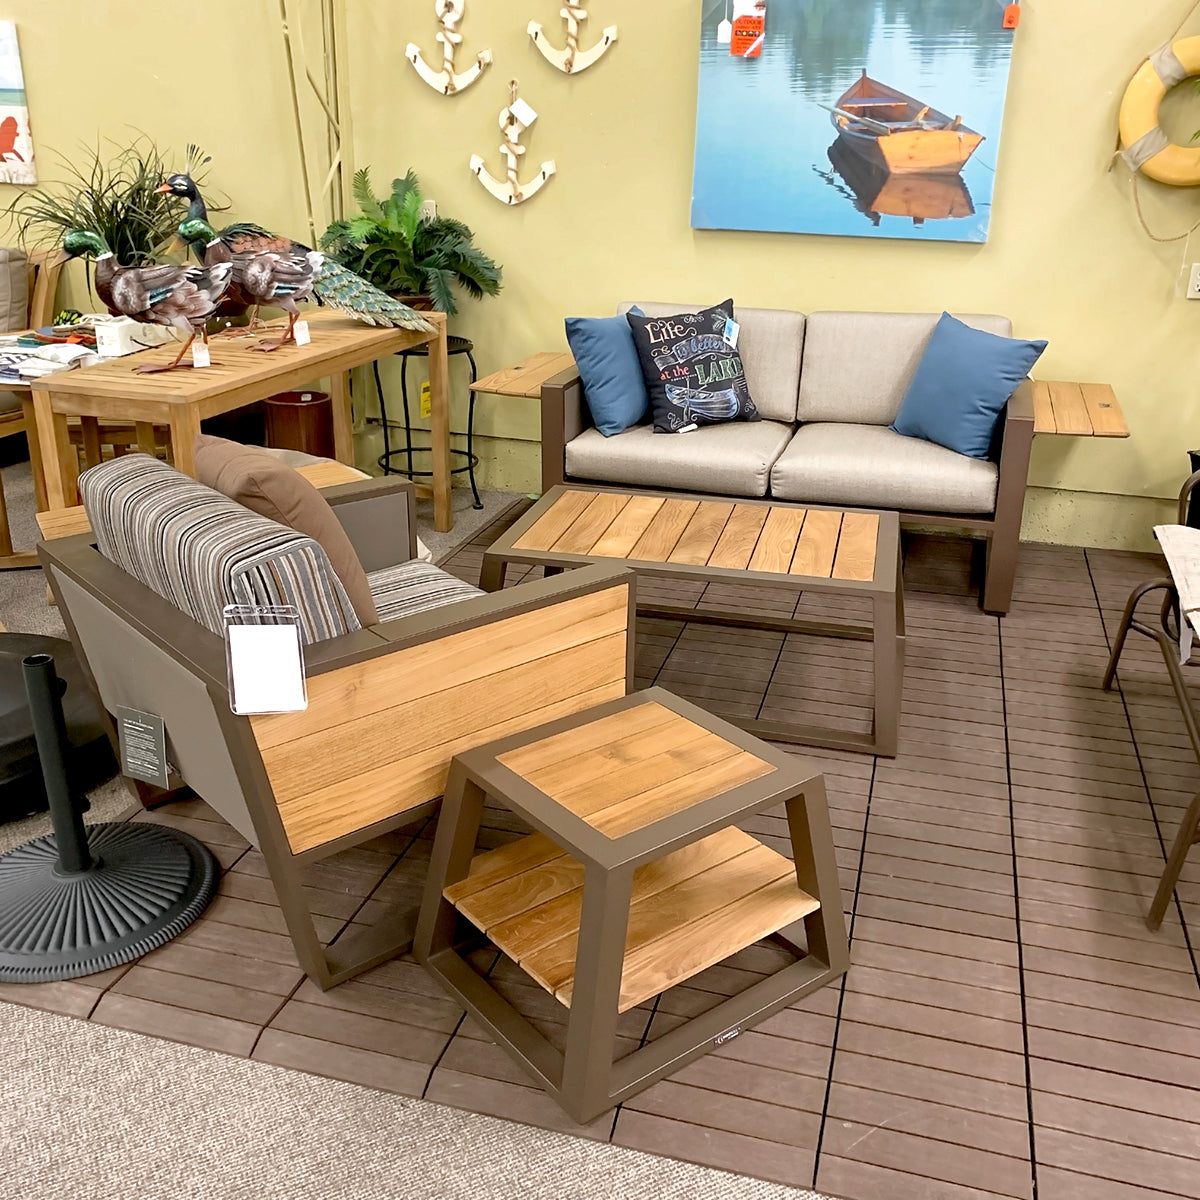 IndoSoul St. Lucia Outdoor End Table in our Jacobs Custom Living Spokane Valley showroom.